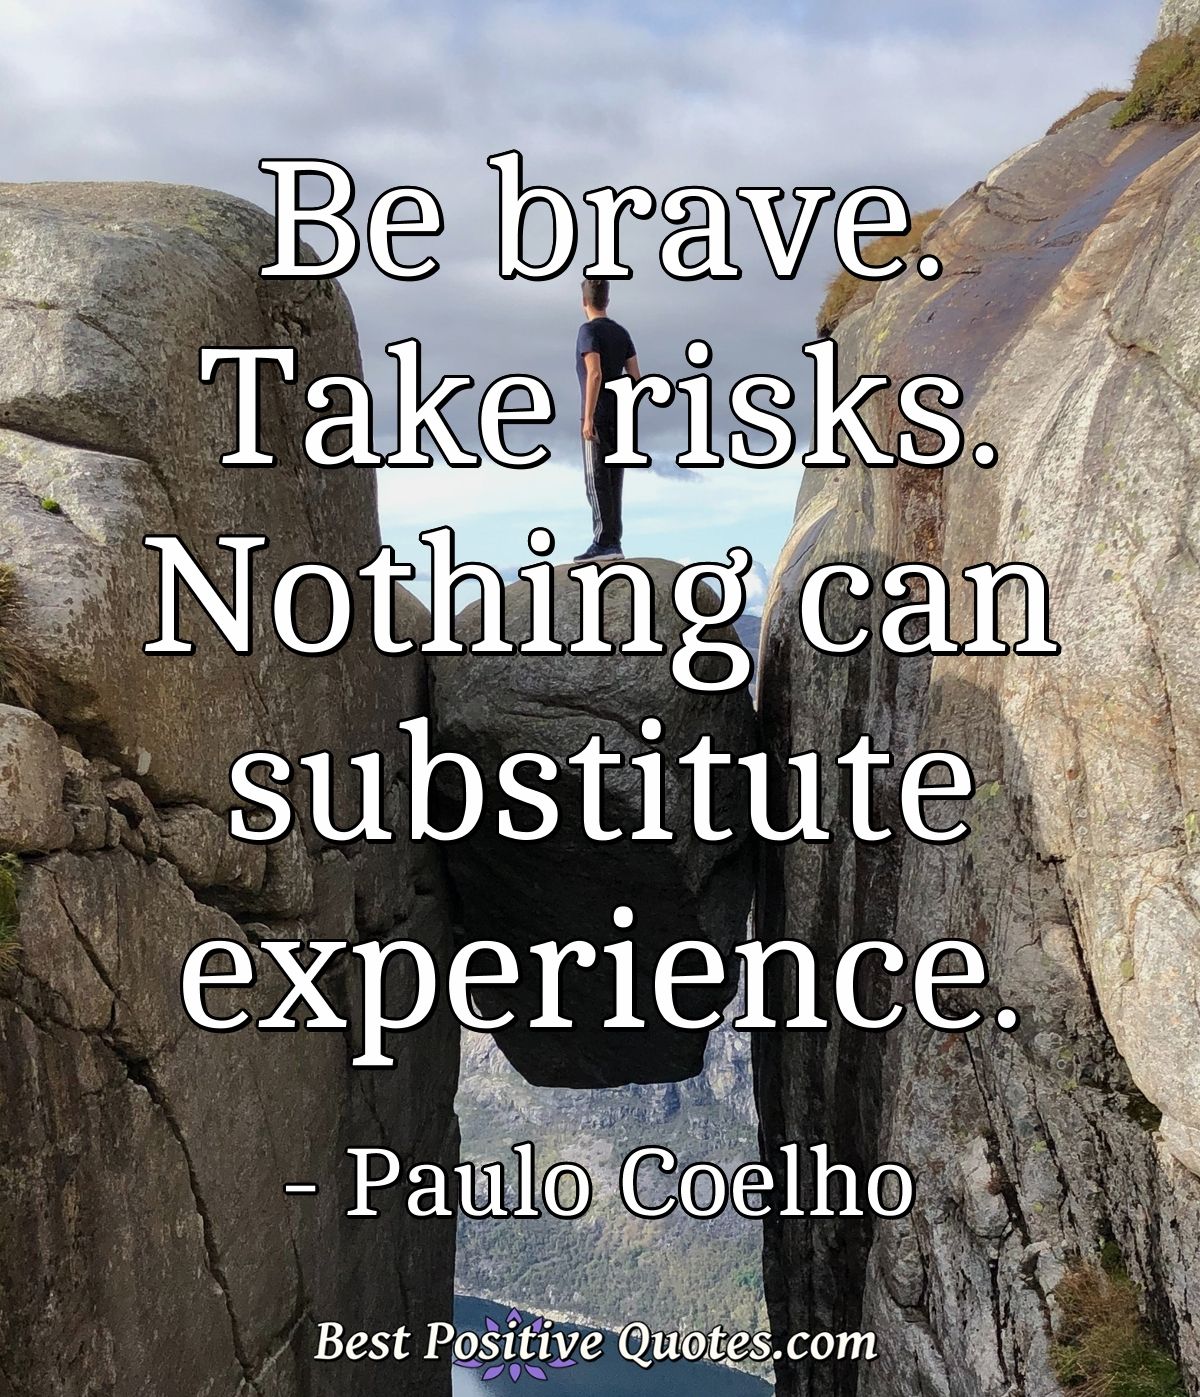 Be brave. Take risks. Nothing can substitute experience. - Paulo Coelho